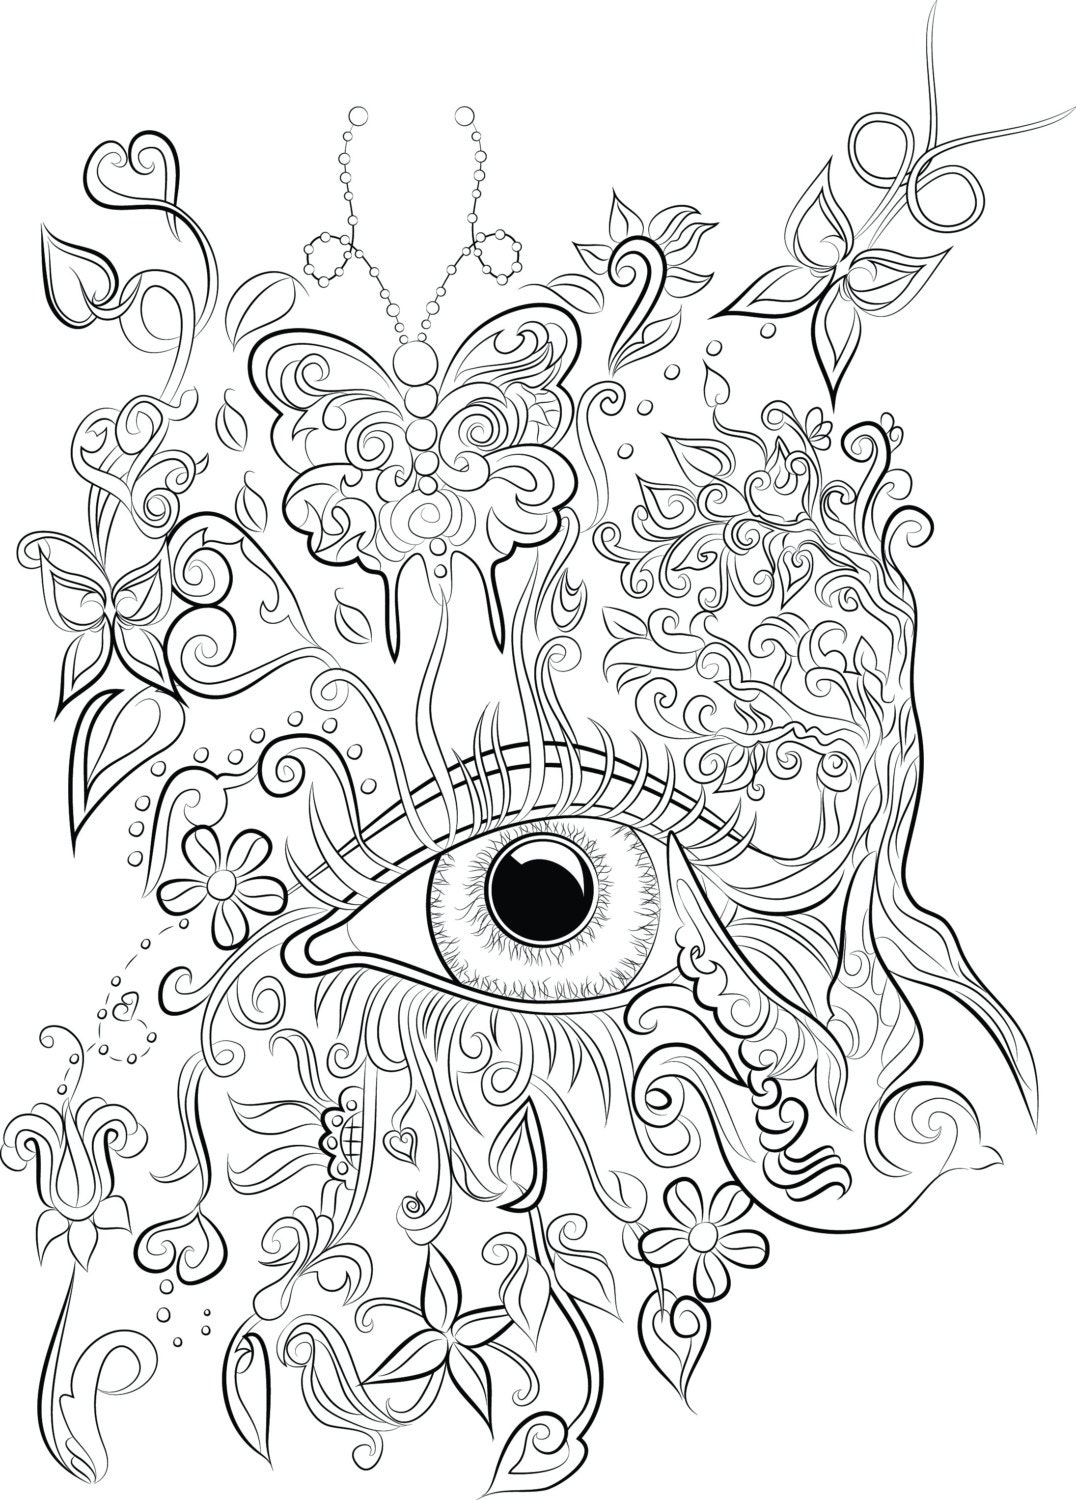 Download Eye design colouring page Instant download to print and colour